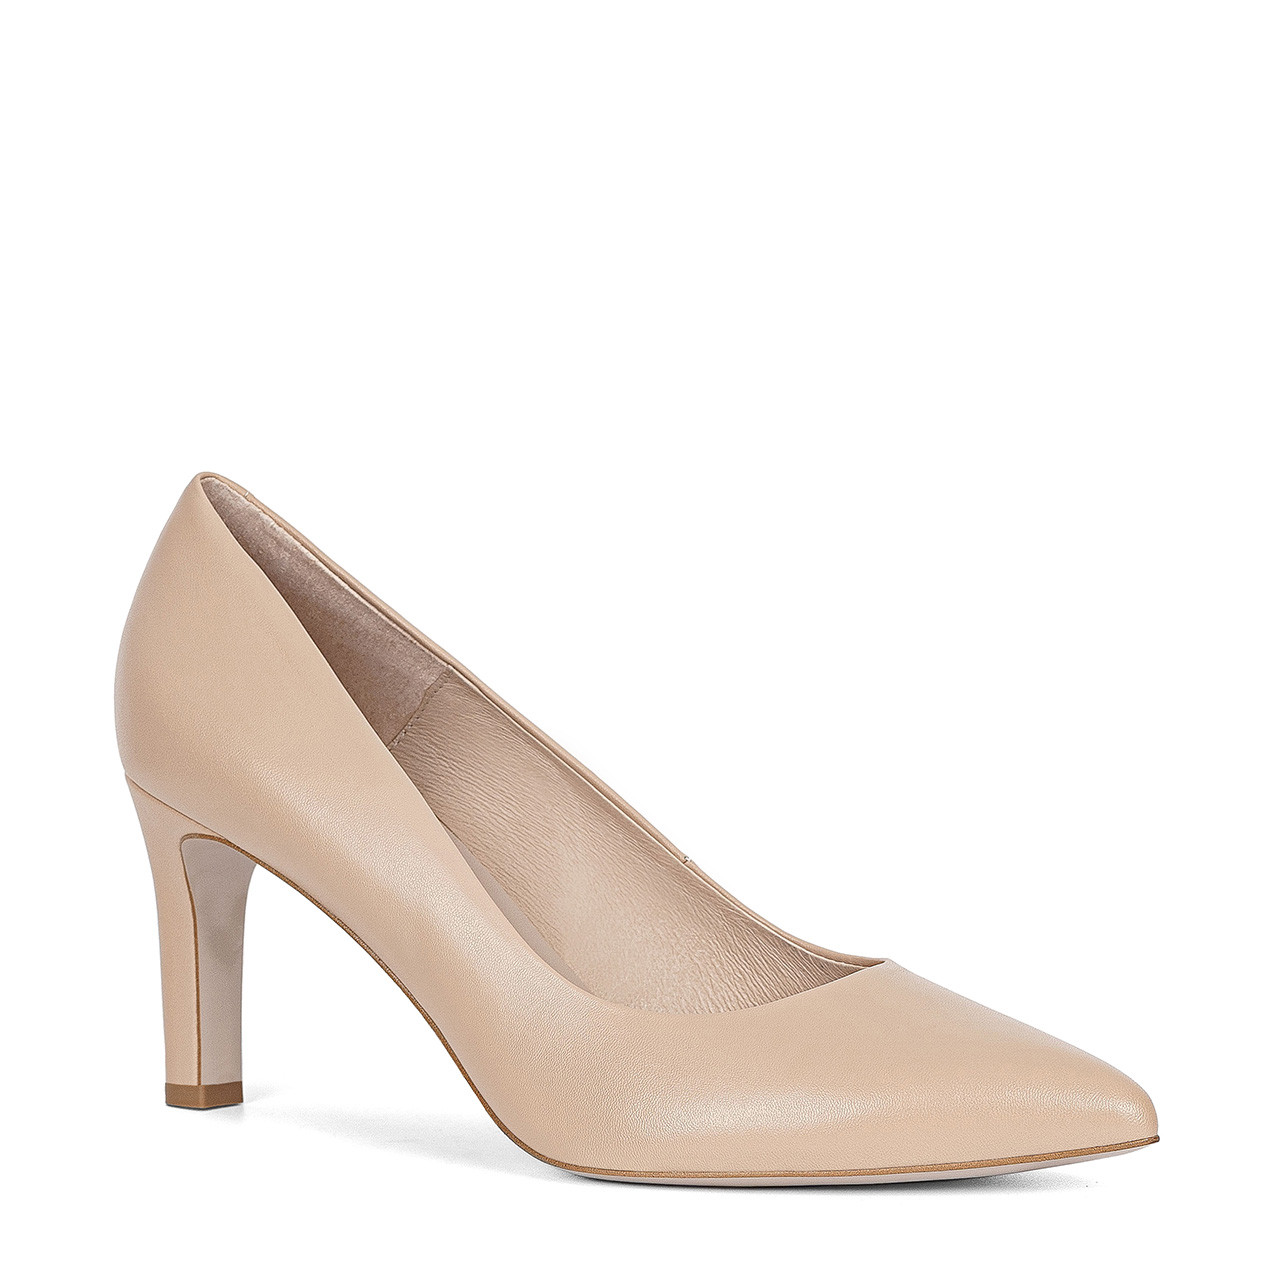 Classic beige pumps with a stable high heel